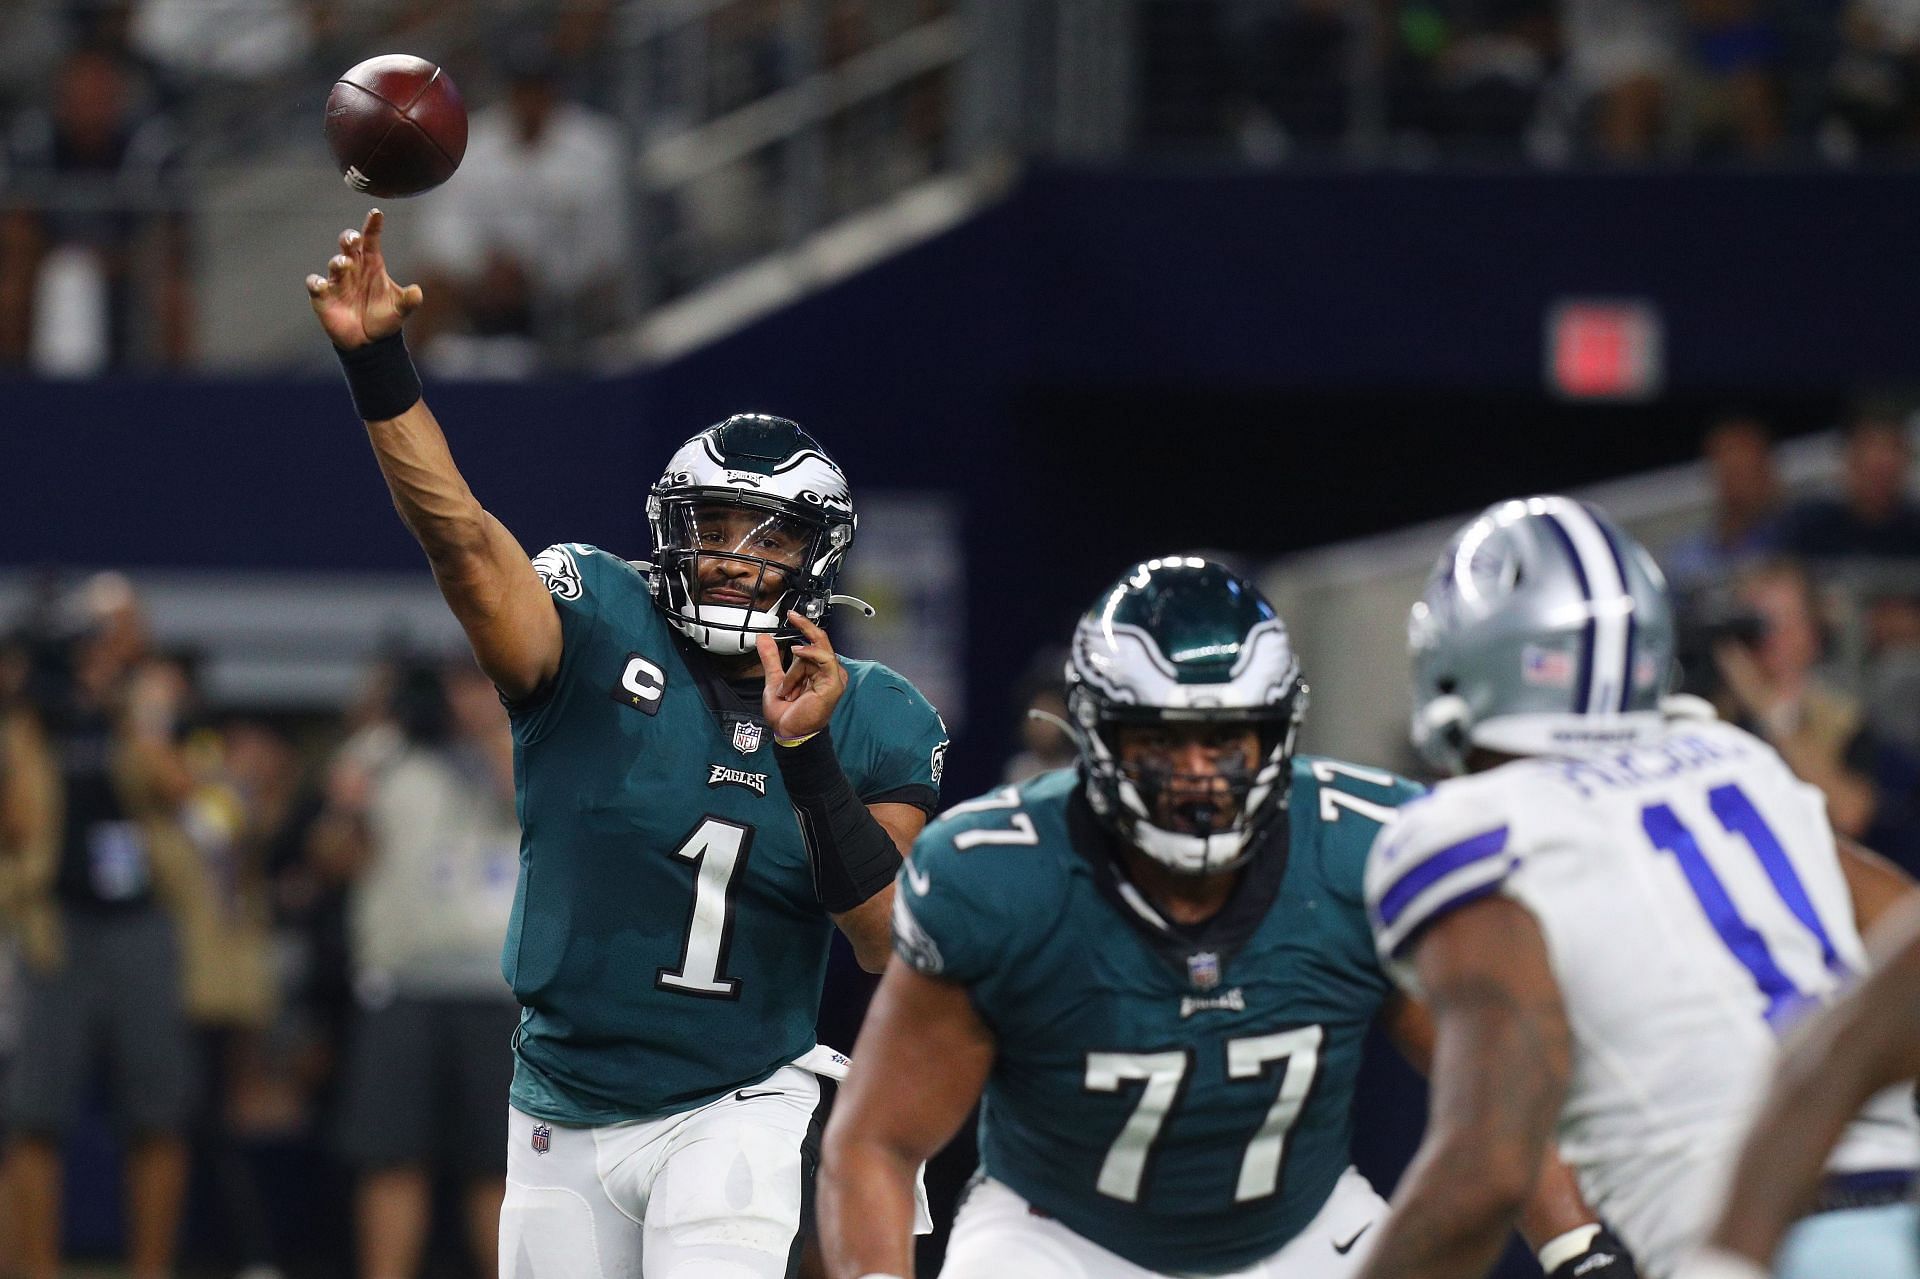 How To Watch Cowboys vs Eagles: Live Stream and Game Predictions